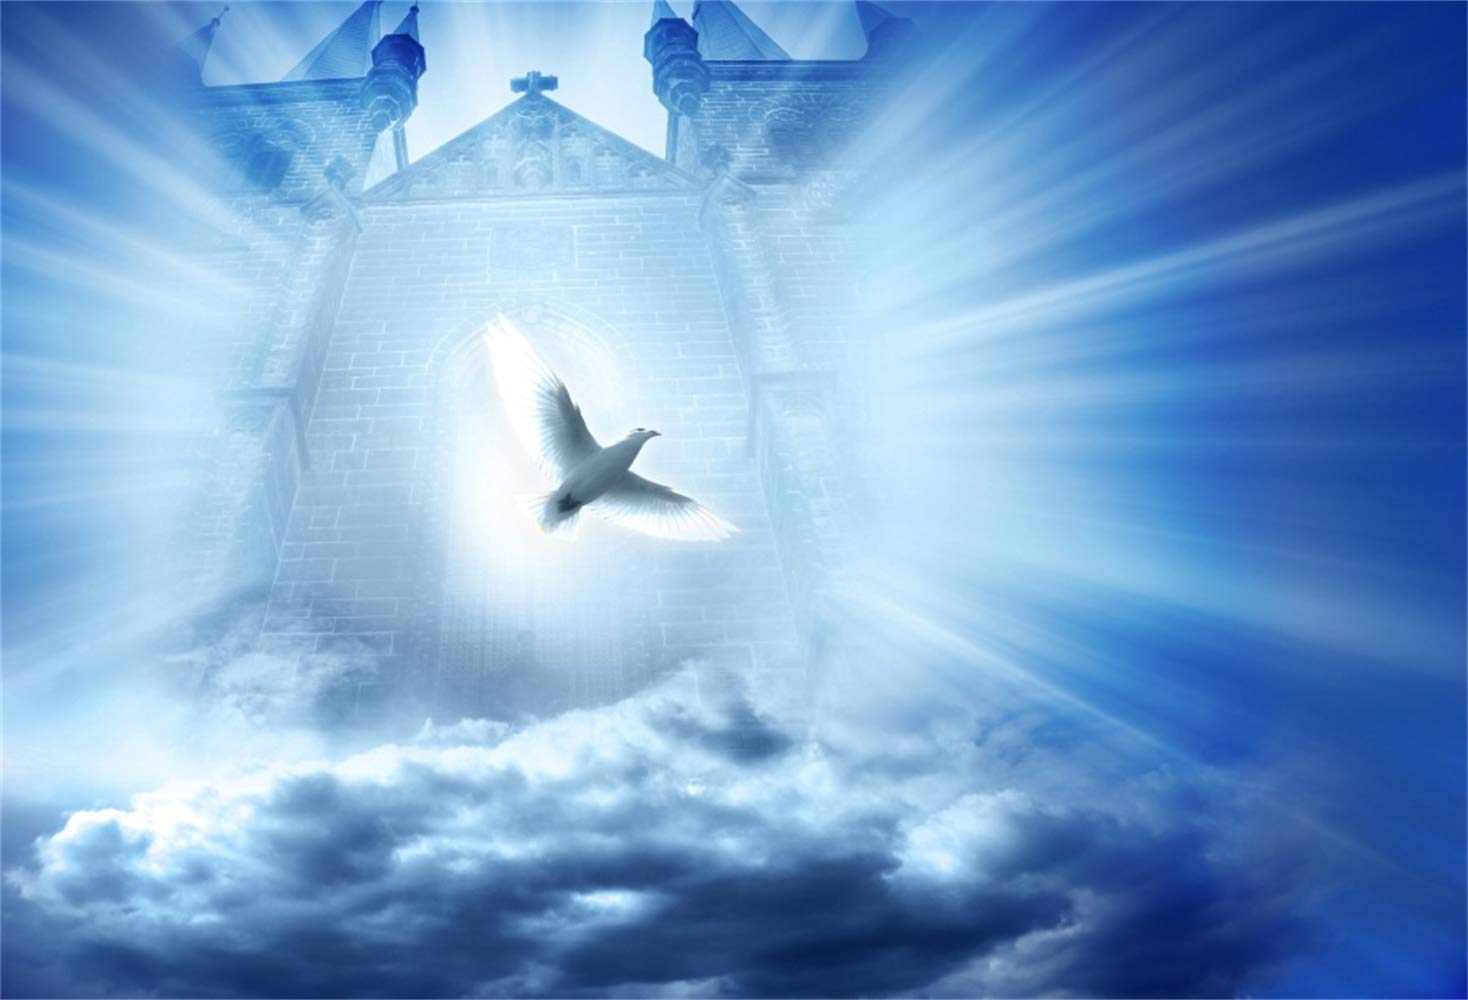 Amazon.com, Laeacco 8x6.5ft Holy Spirit Dove Light Rays from The Gate of Heaven Backdrop Vinyl Sea of Clouds Paradise Pentecost Background Church Bible School Event Activities Wallpaper Jesus Christian Belief